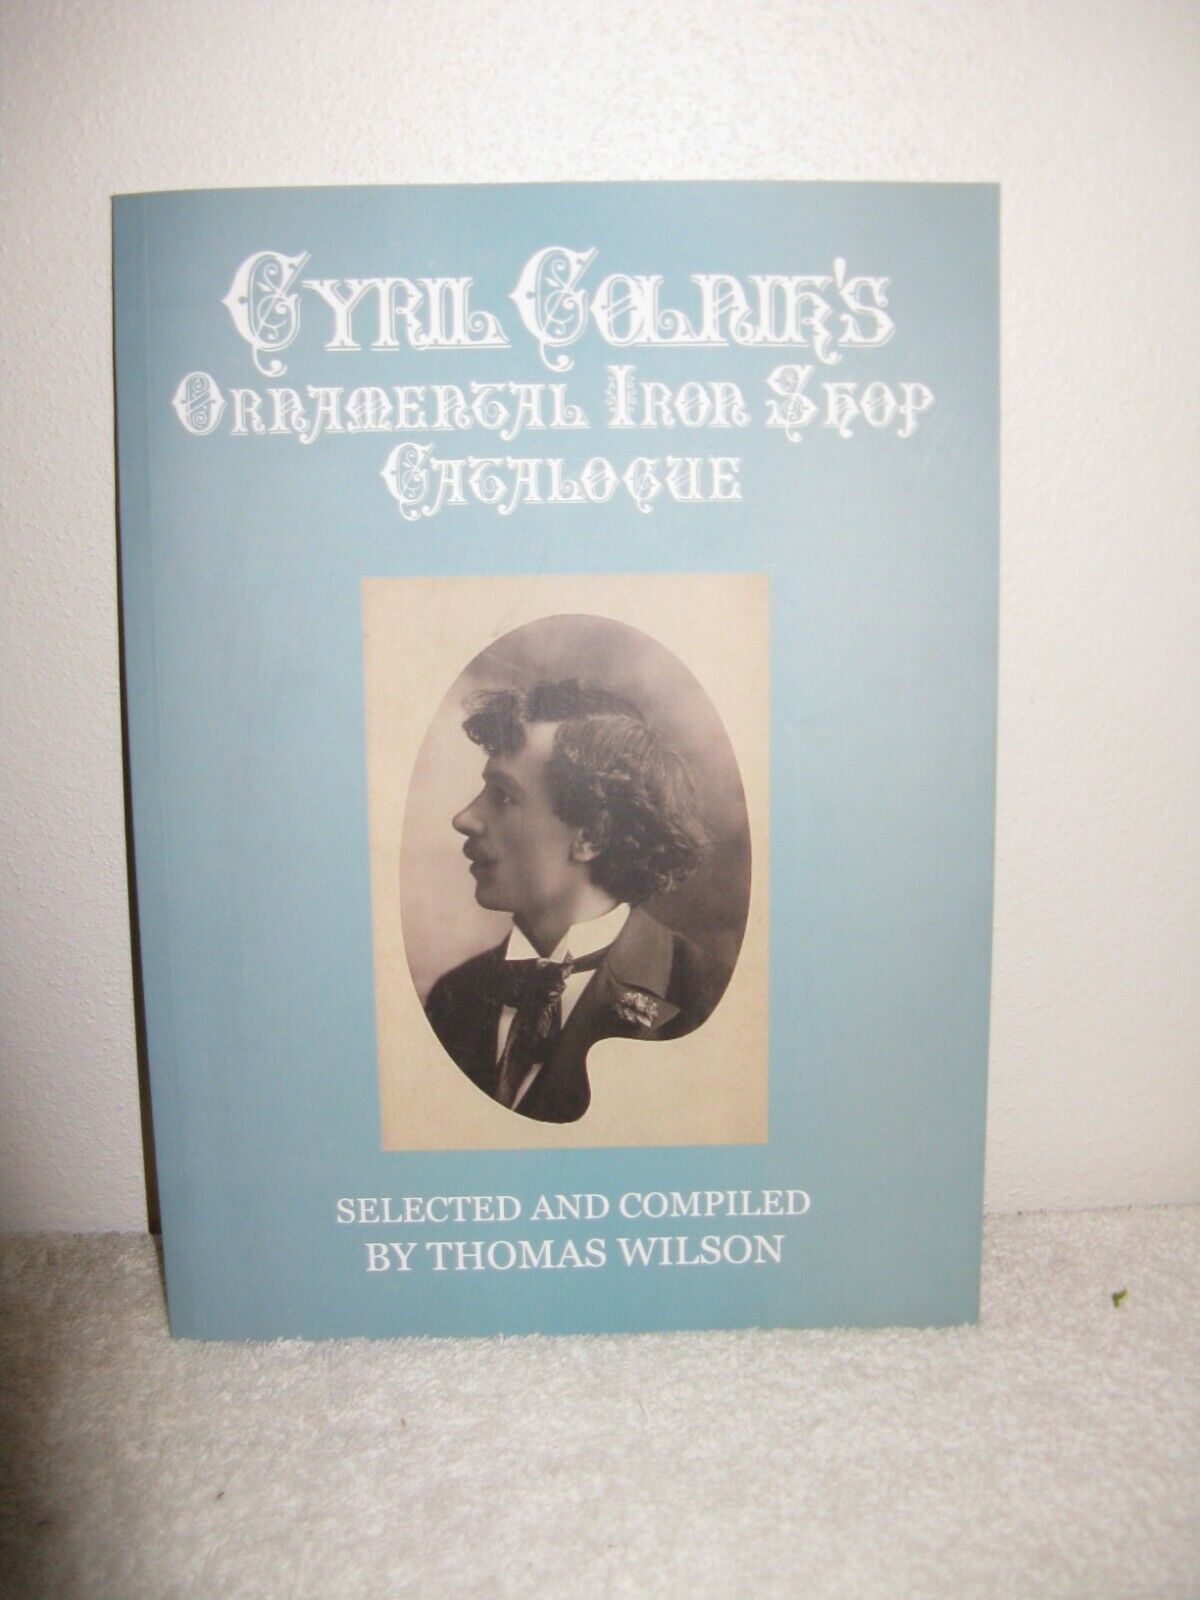 Cyril Colnik\'s Ornamental Iron Shop Catalogue selected/compiled by Thomas Wilson